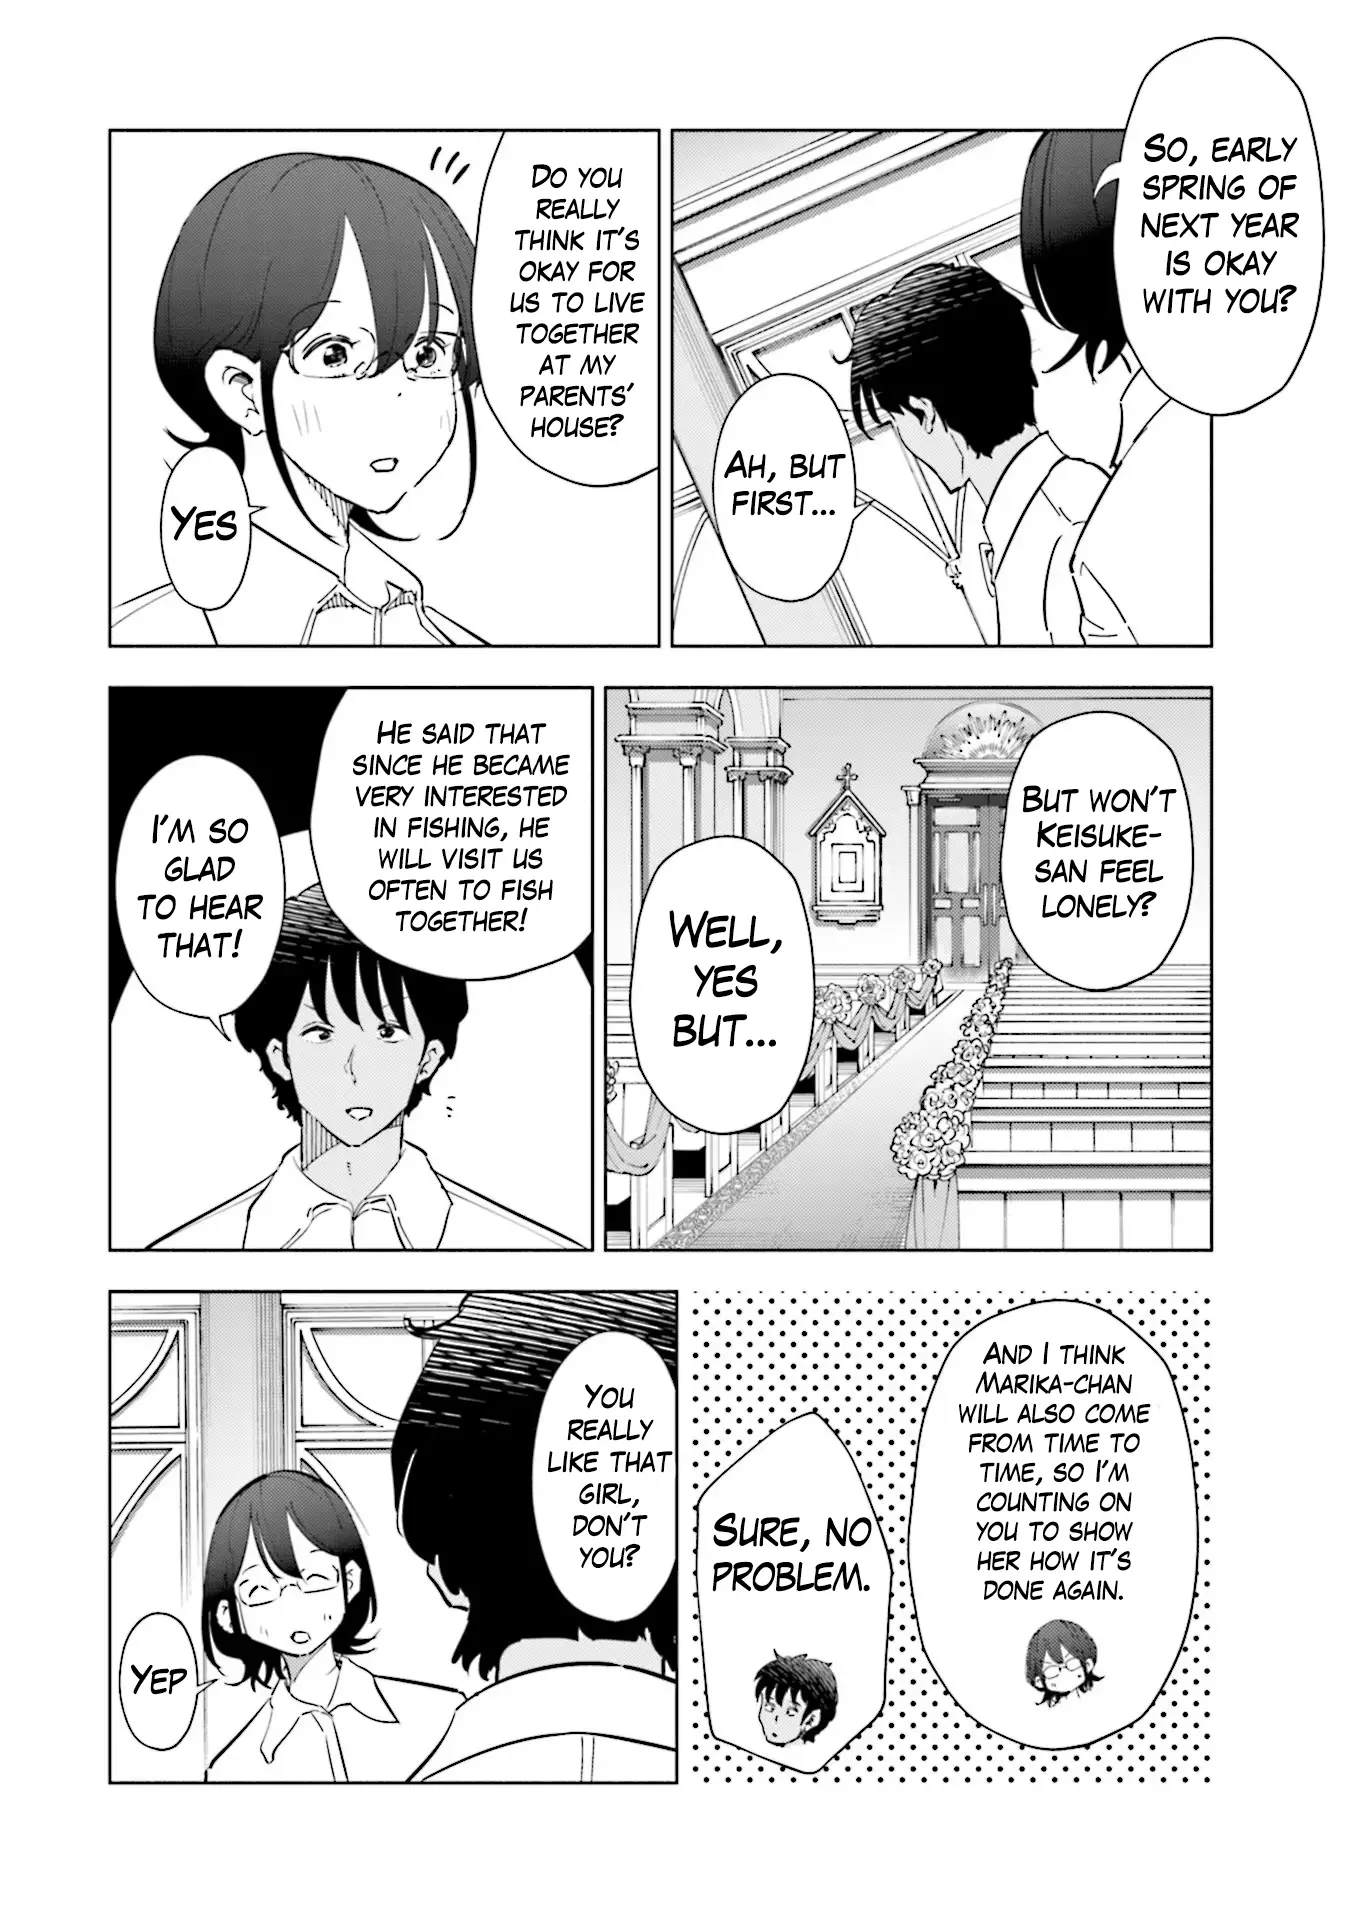 If My Wife Became An Elementary School Student - 98 page 6-6a438b8c